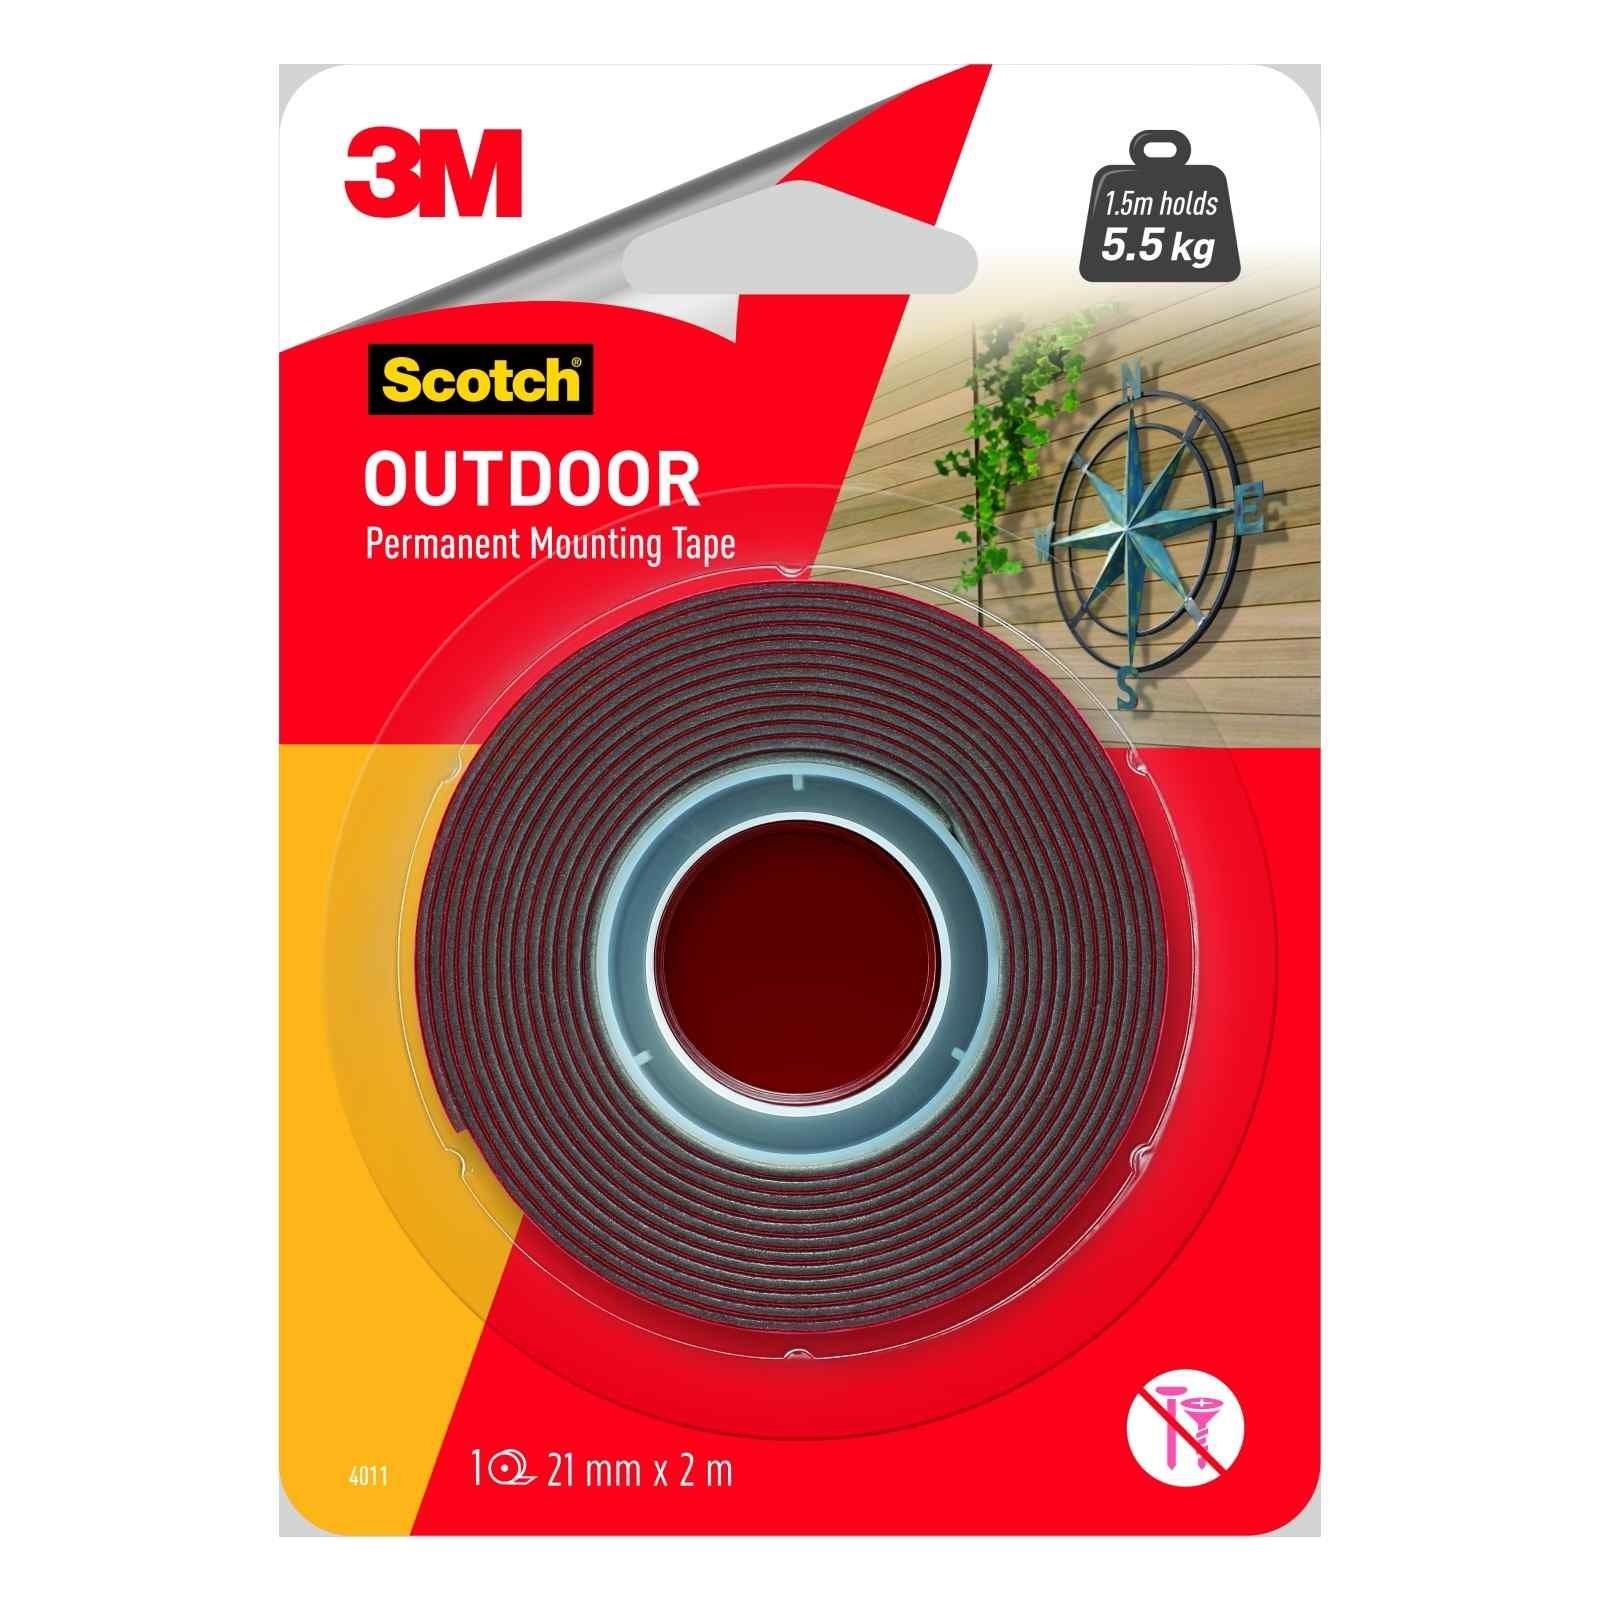 3M Scotch Scotch Outdoor Strong Mounting Tape 21MM X 2M